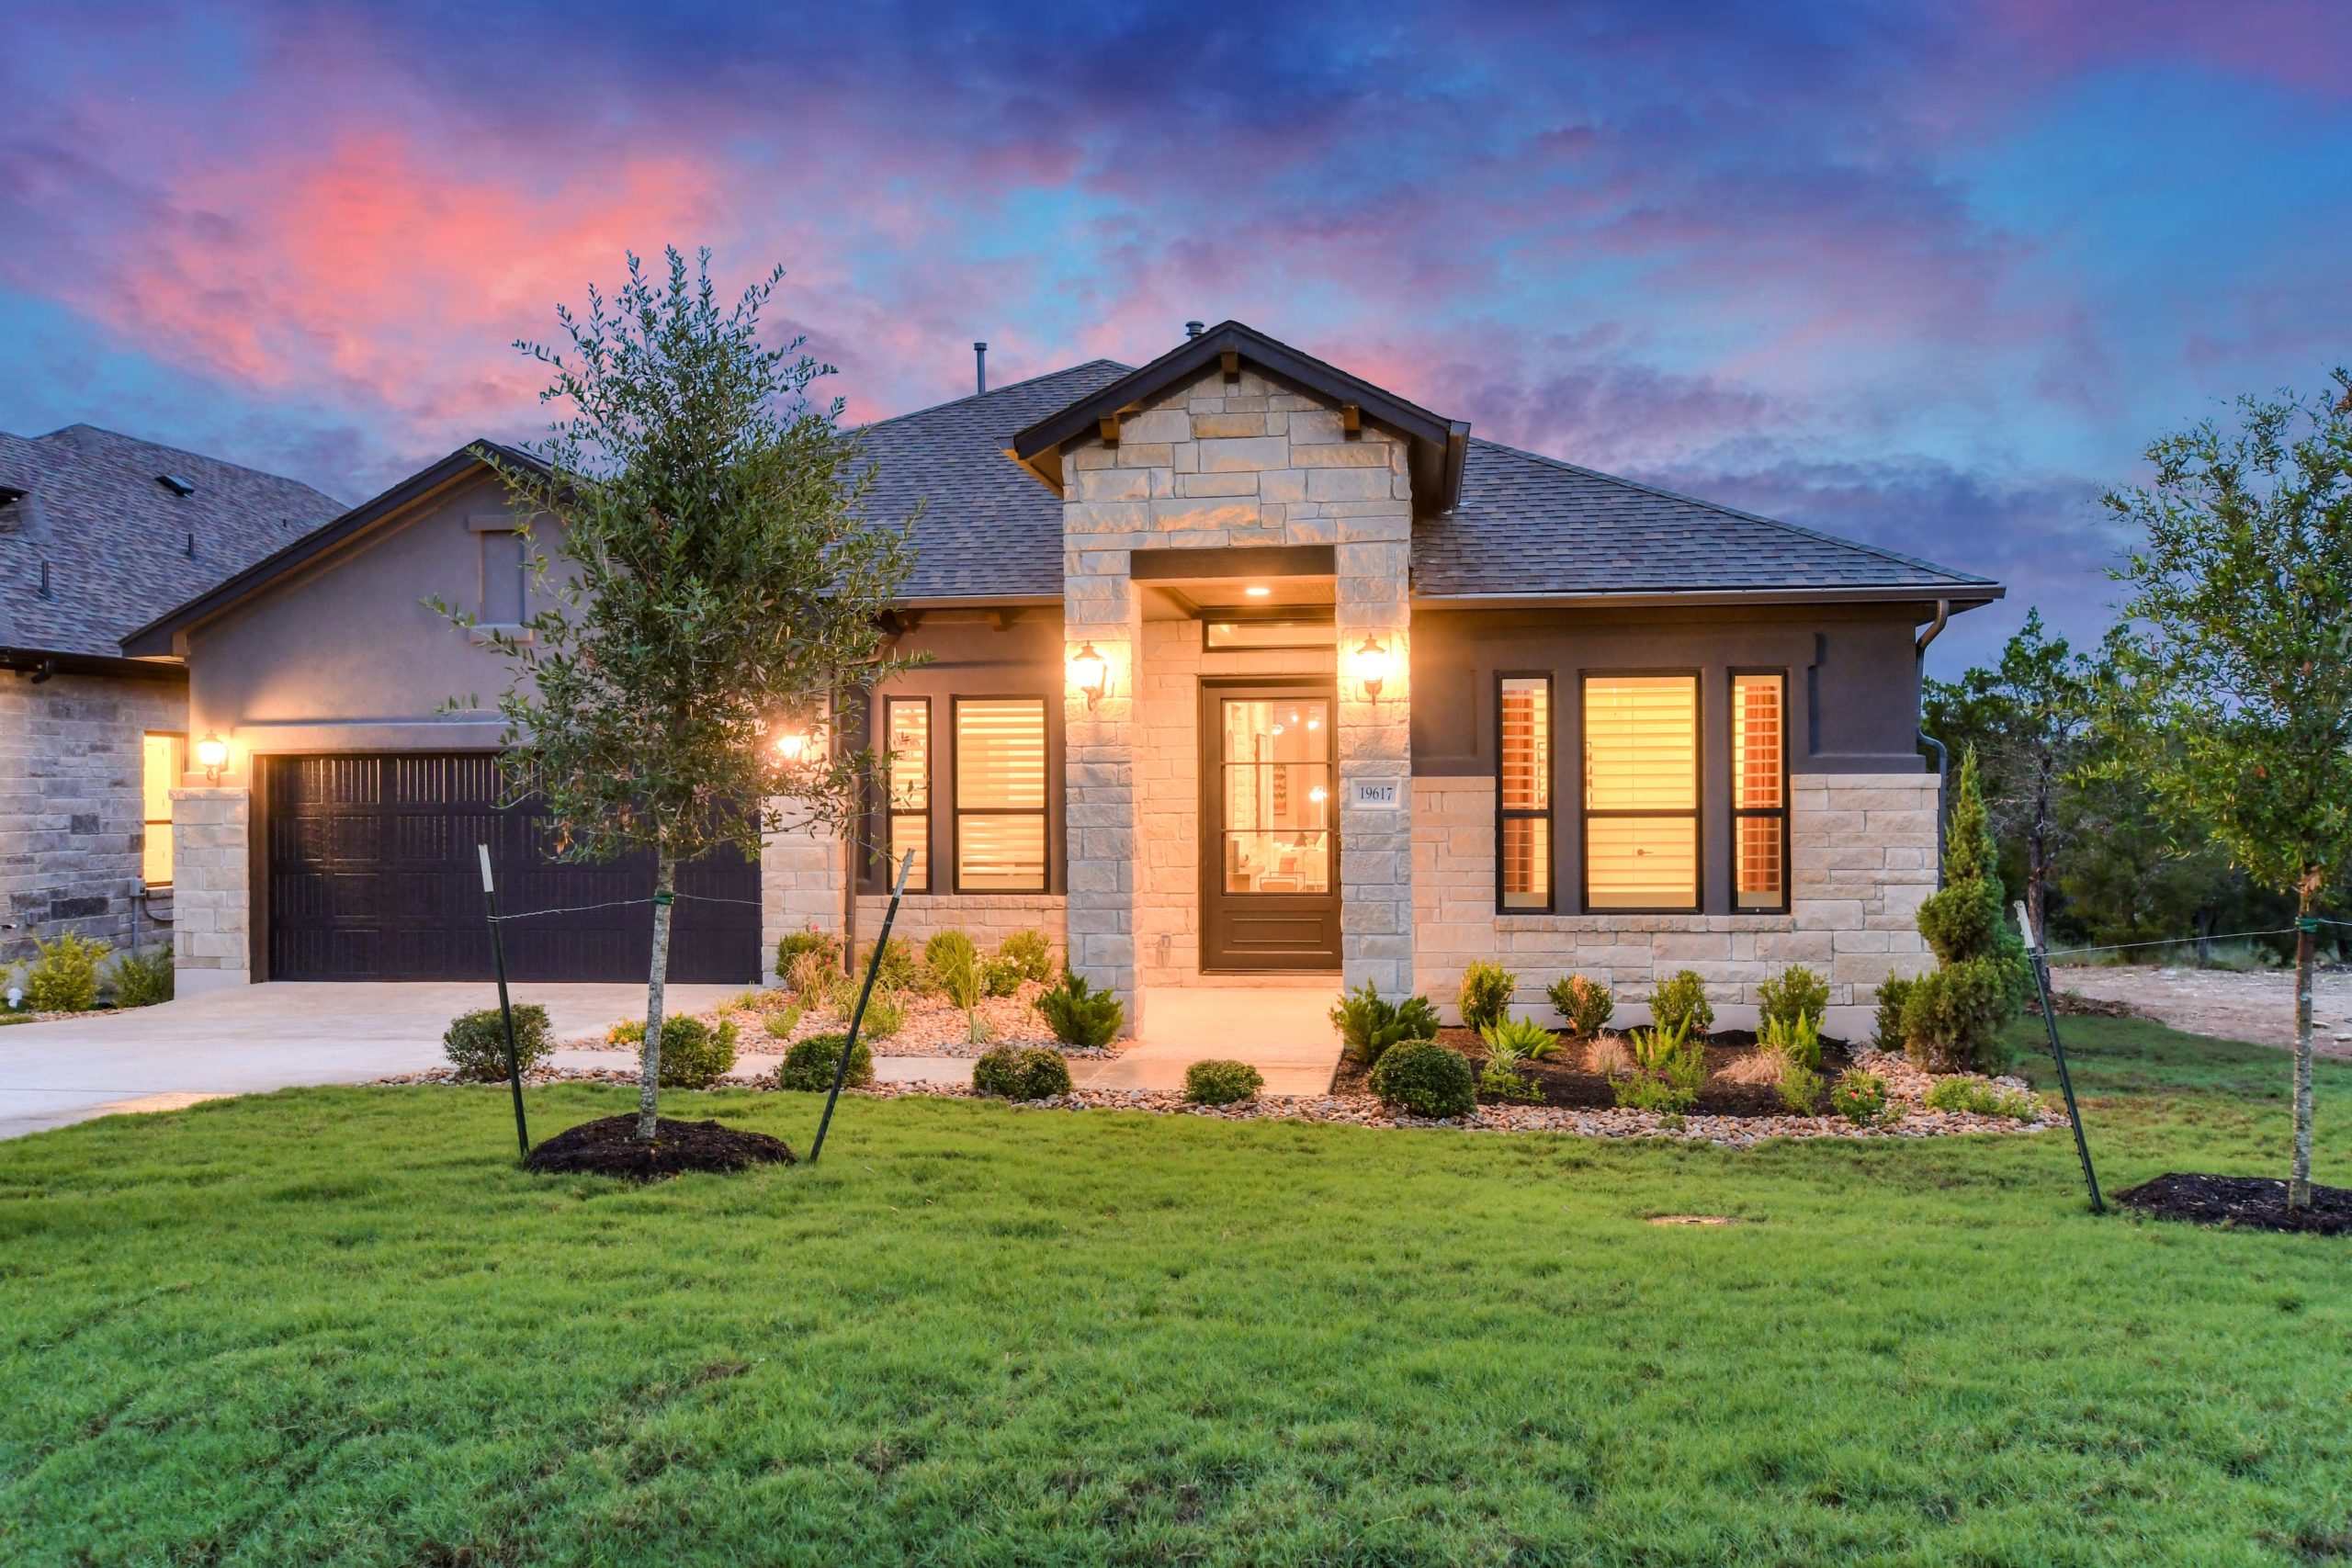 Giddens Homes MAKES Custom HOME Buying in the Texas Hill Country easy